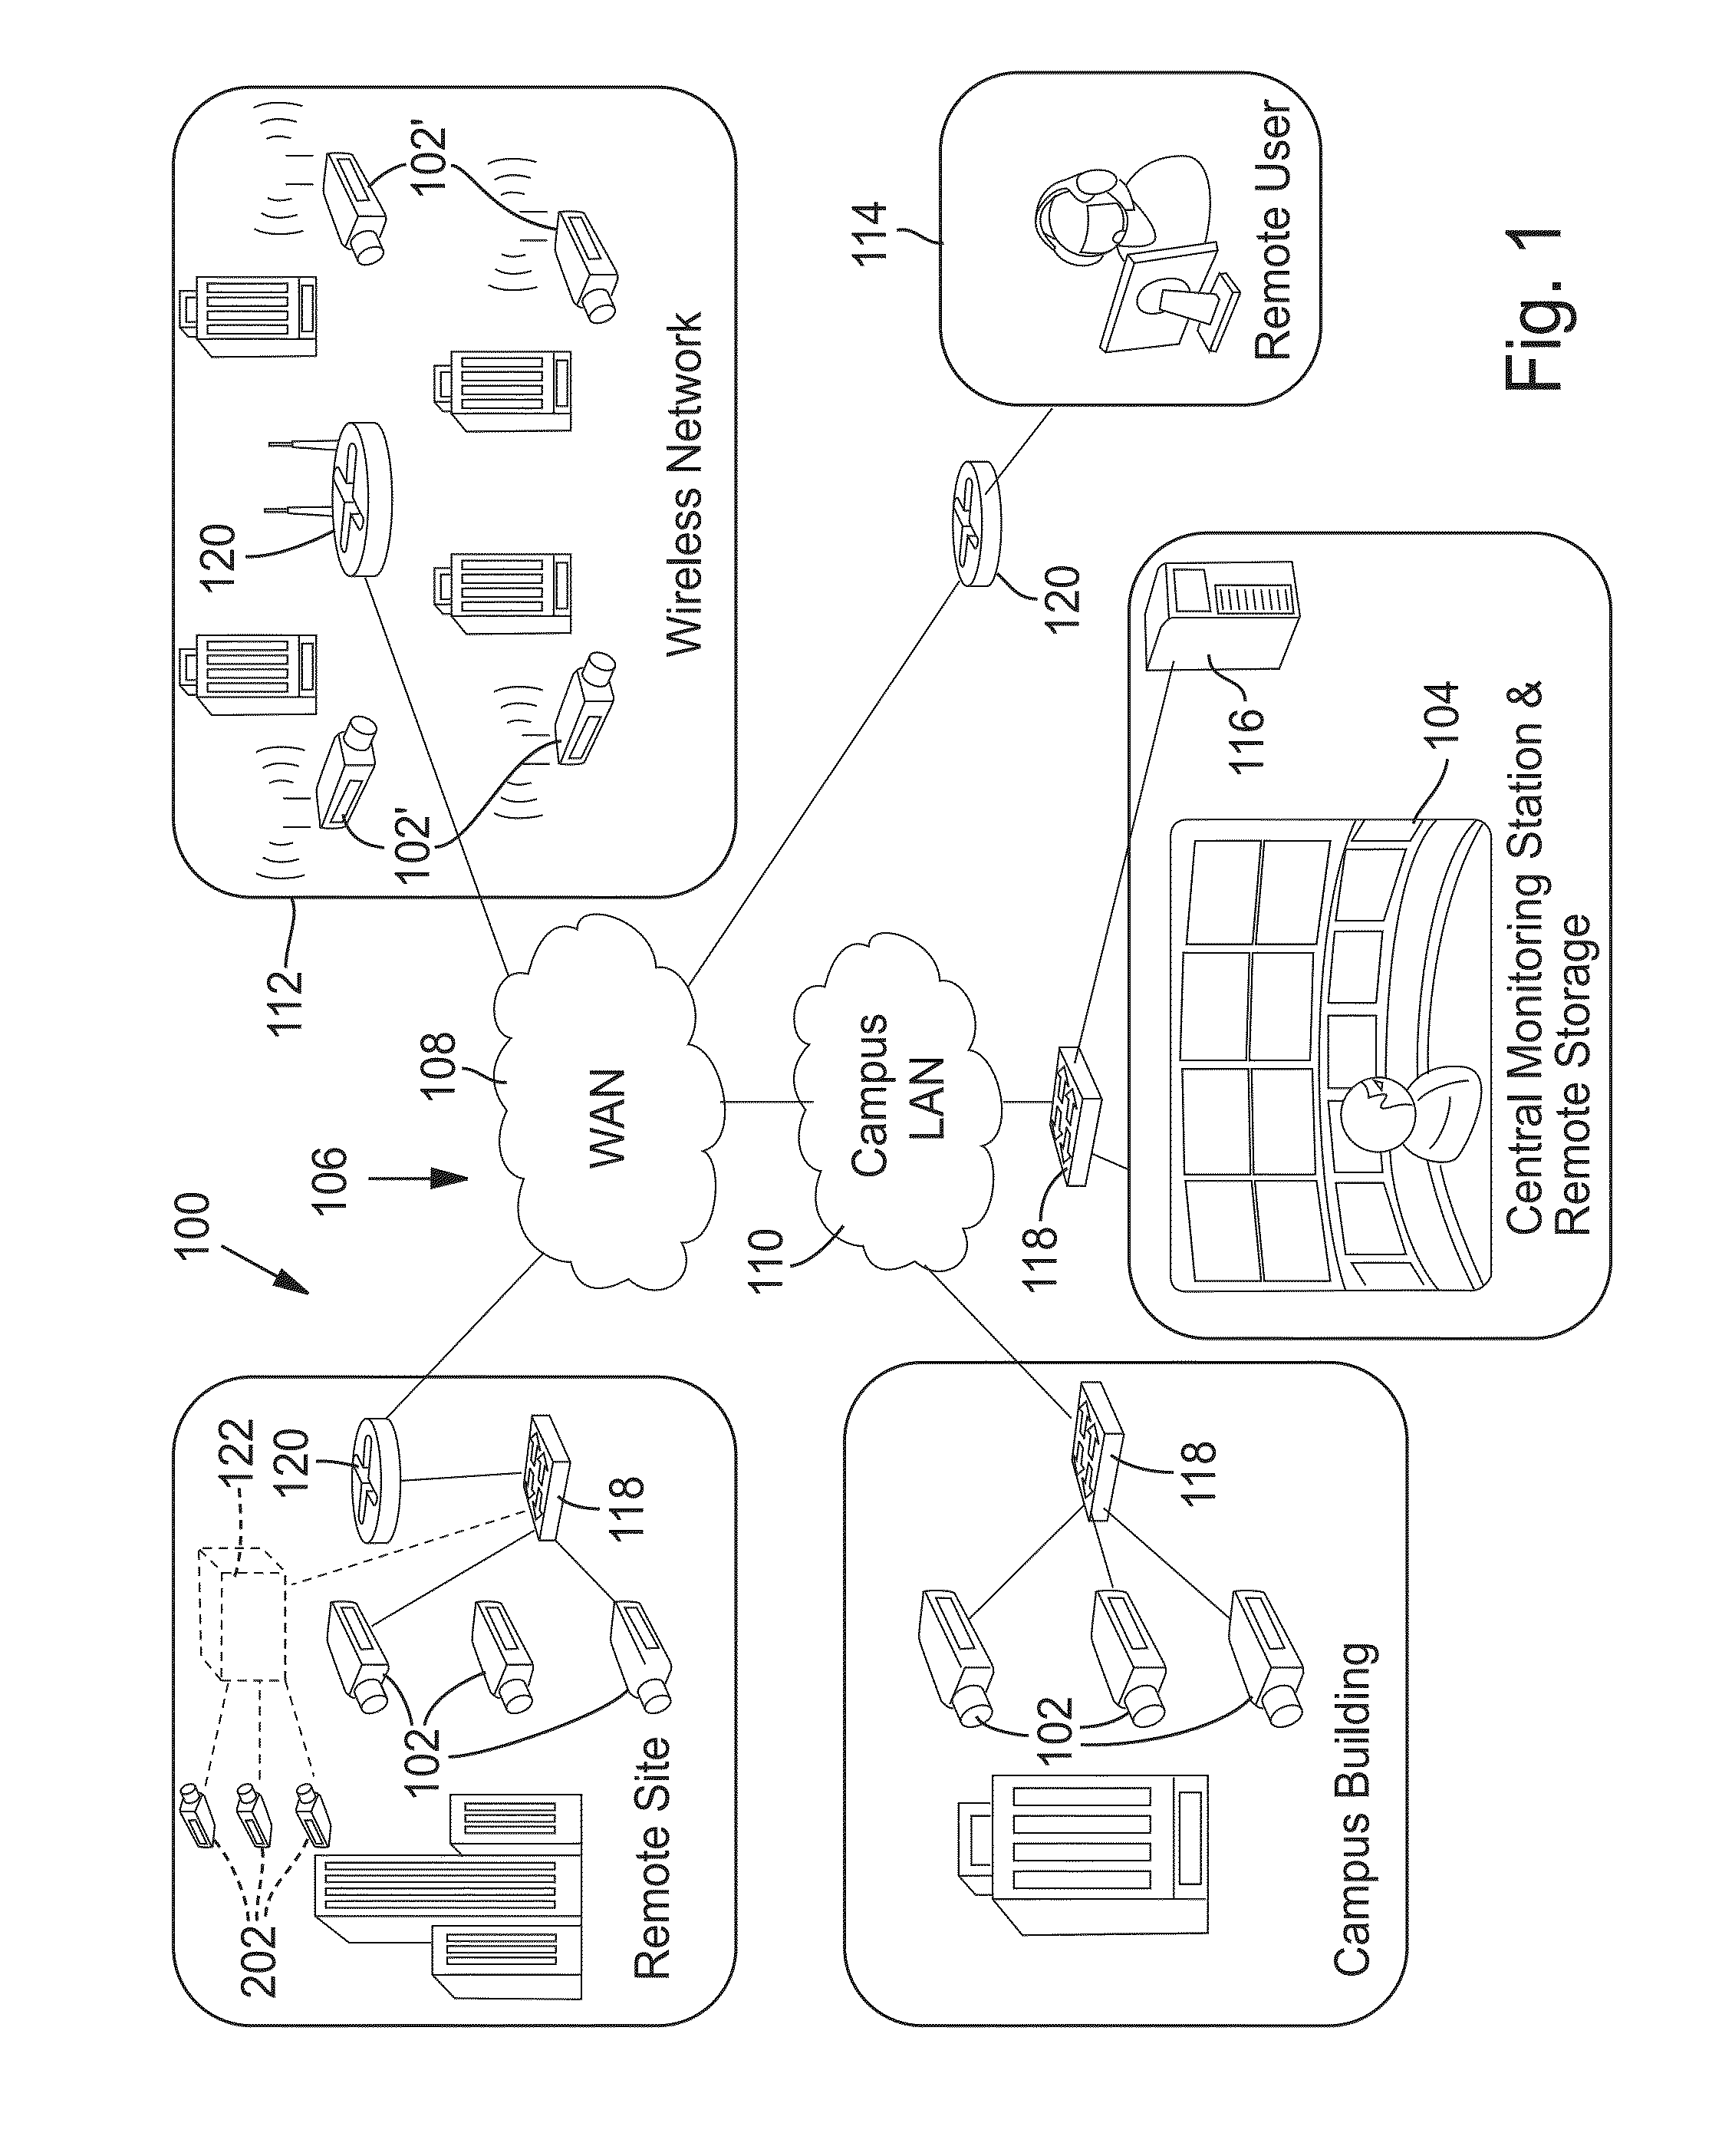 Content-aware computer networking devices with video analytics for reducing video storage and video communication bandwidth requirements of a video surveillance network camera system